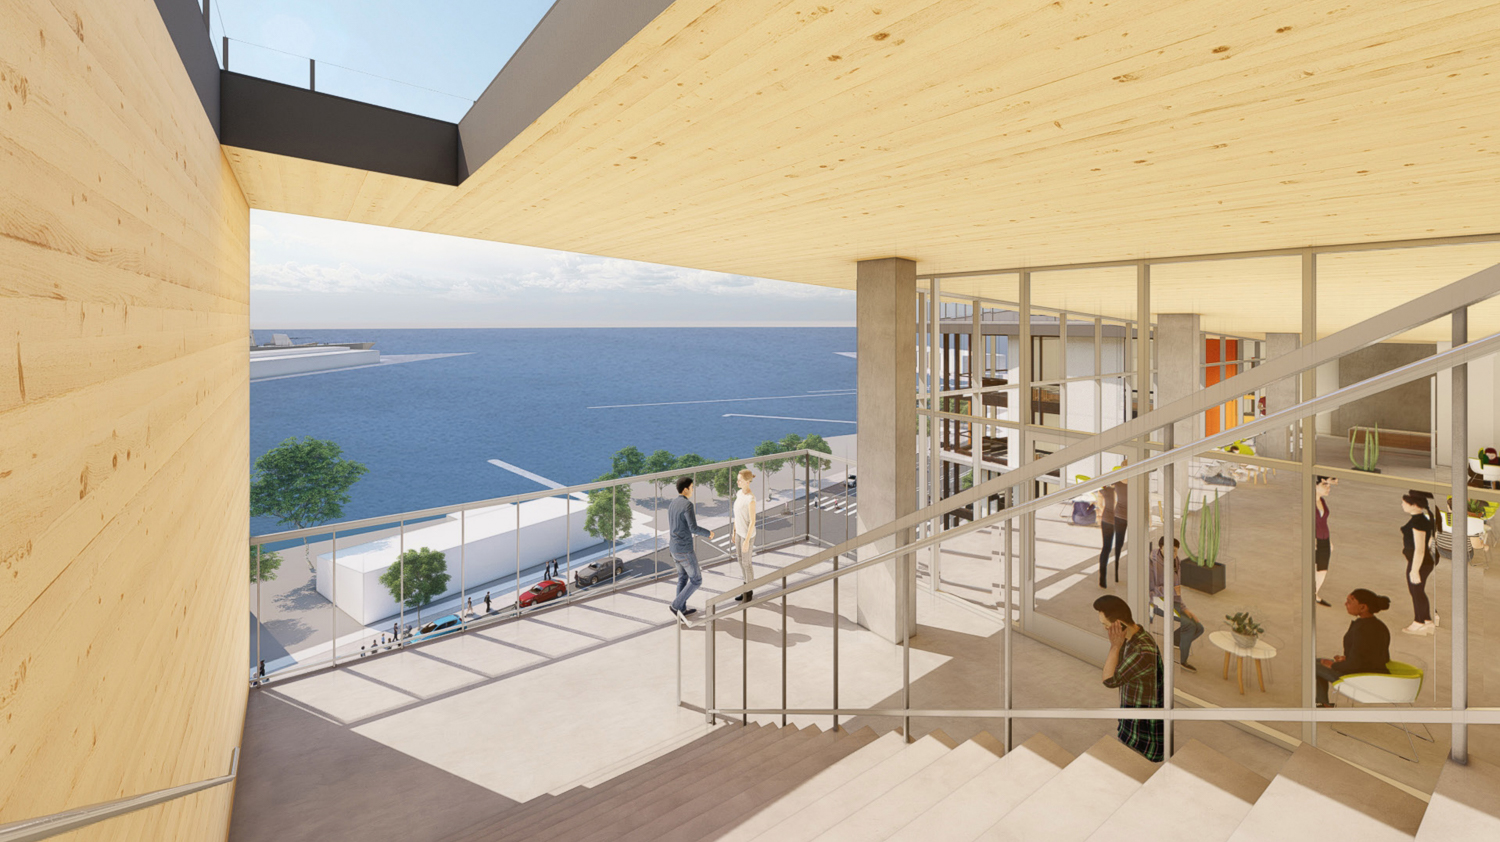 Block 9A design at 400 China Basin Street eighth floor terrace with view, rendering by Mithun